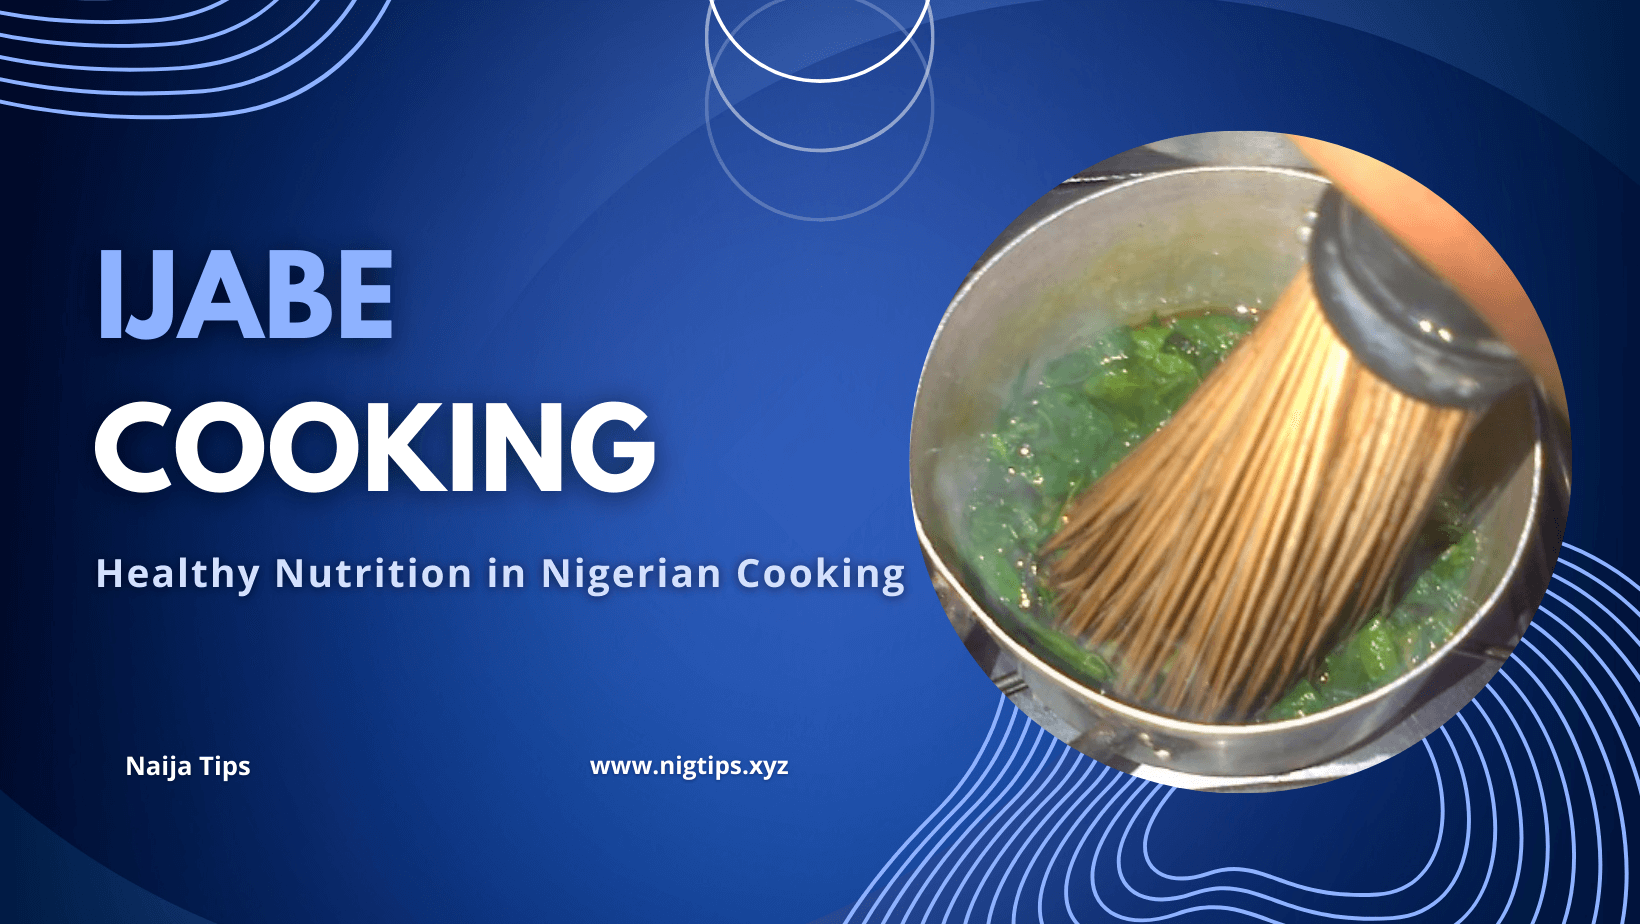 Healthy Nutrition in Nigerian Cooking - Ijabe Cooking